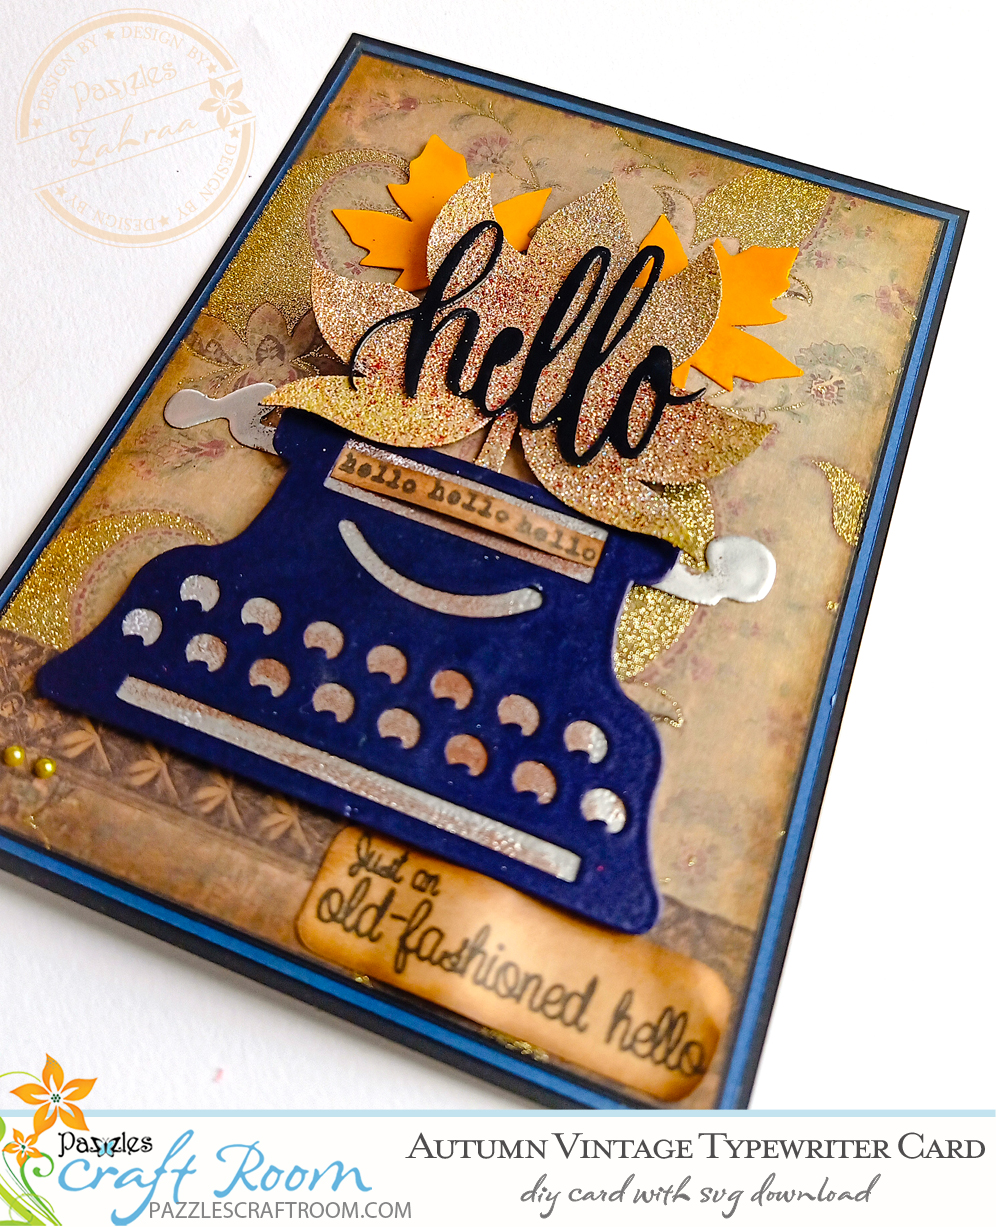 Pazzles DIY Autumn Vintage Typewriter Card with instant SVG download. Compatible with all major electronic cutters including Pazzles Inspiration, Cricut, and Silhouette Cameo. Design by Zahraa Darweesh.